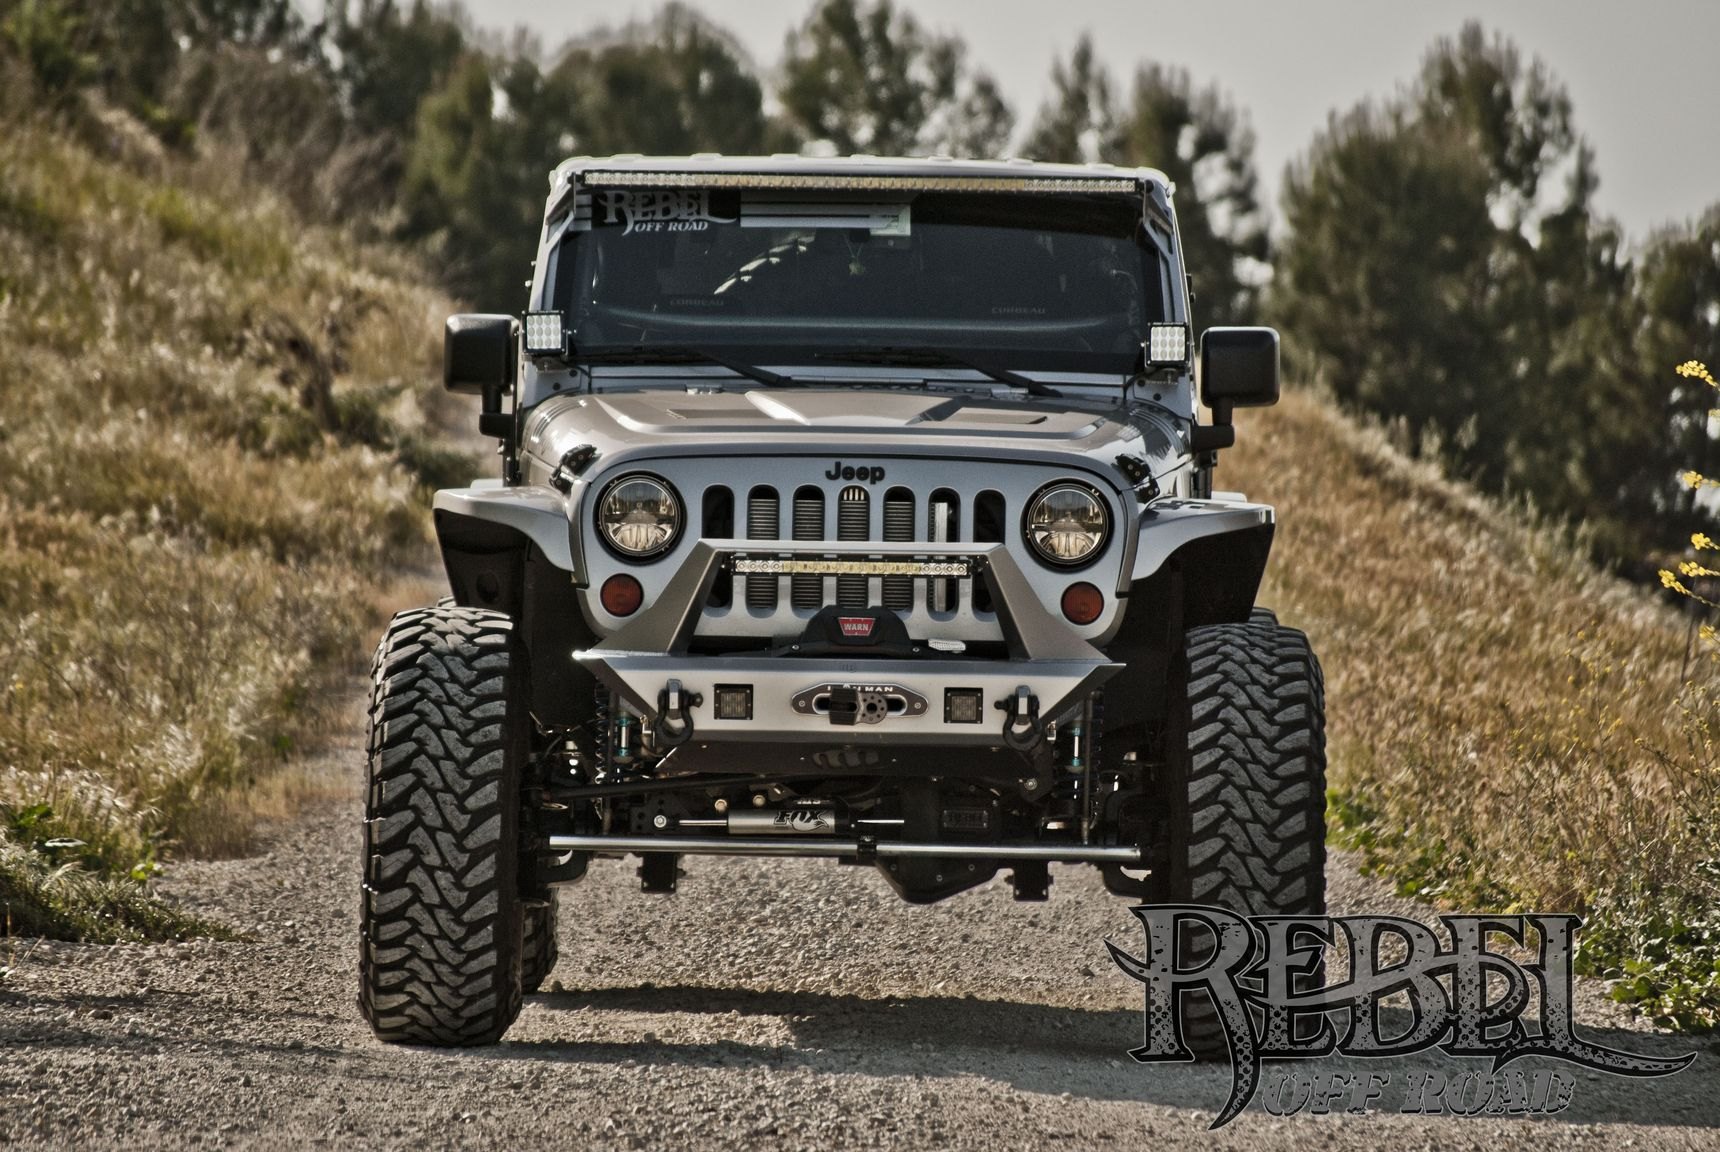 Impressive Rebel Off Road Build Gray Lifted Jeep Wrangler With Off